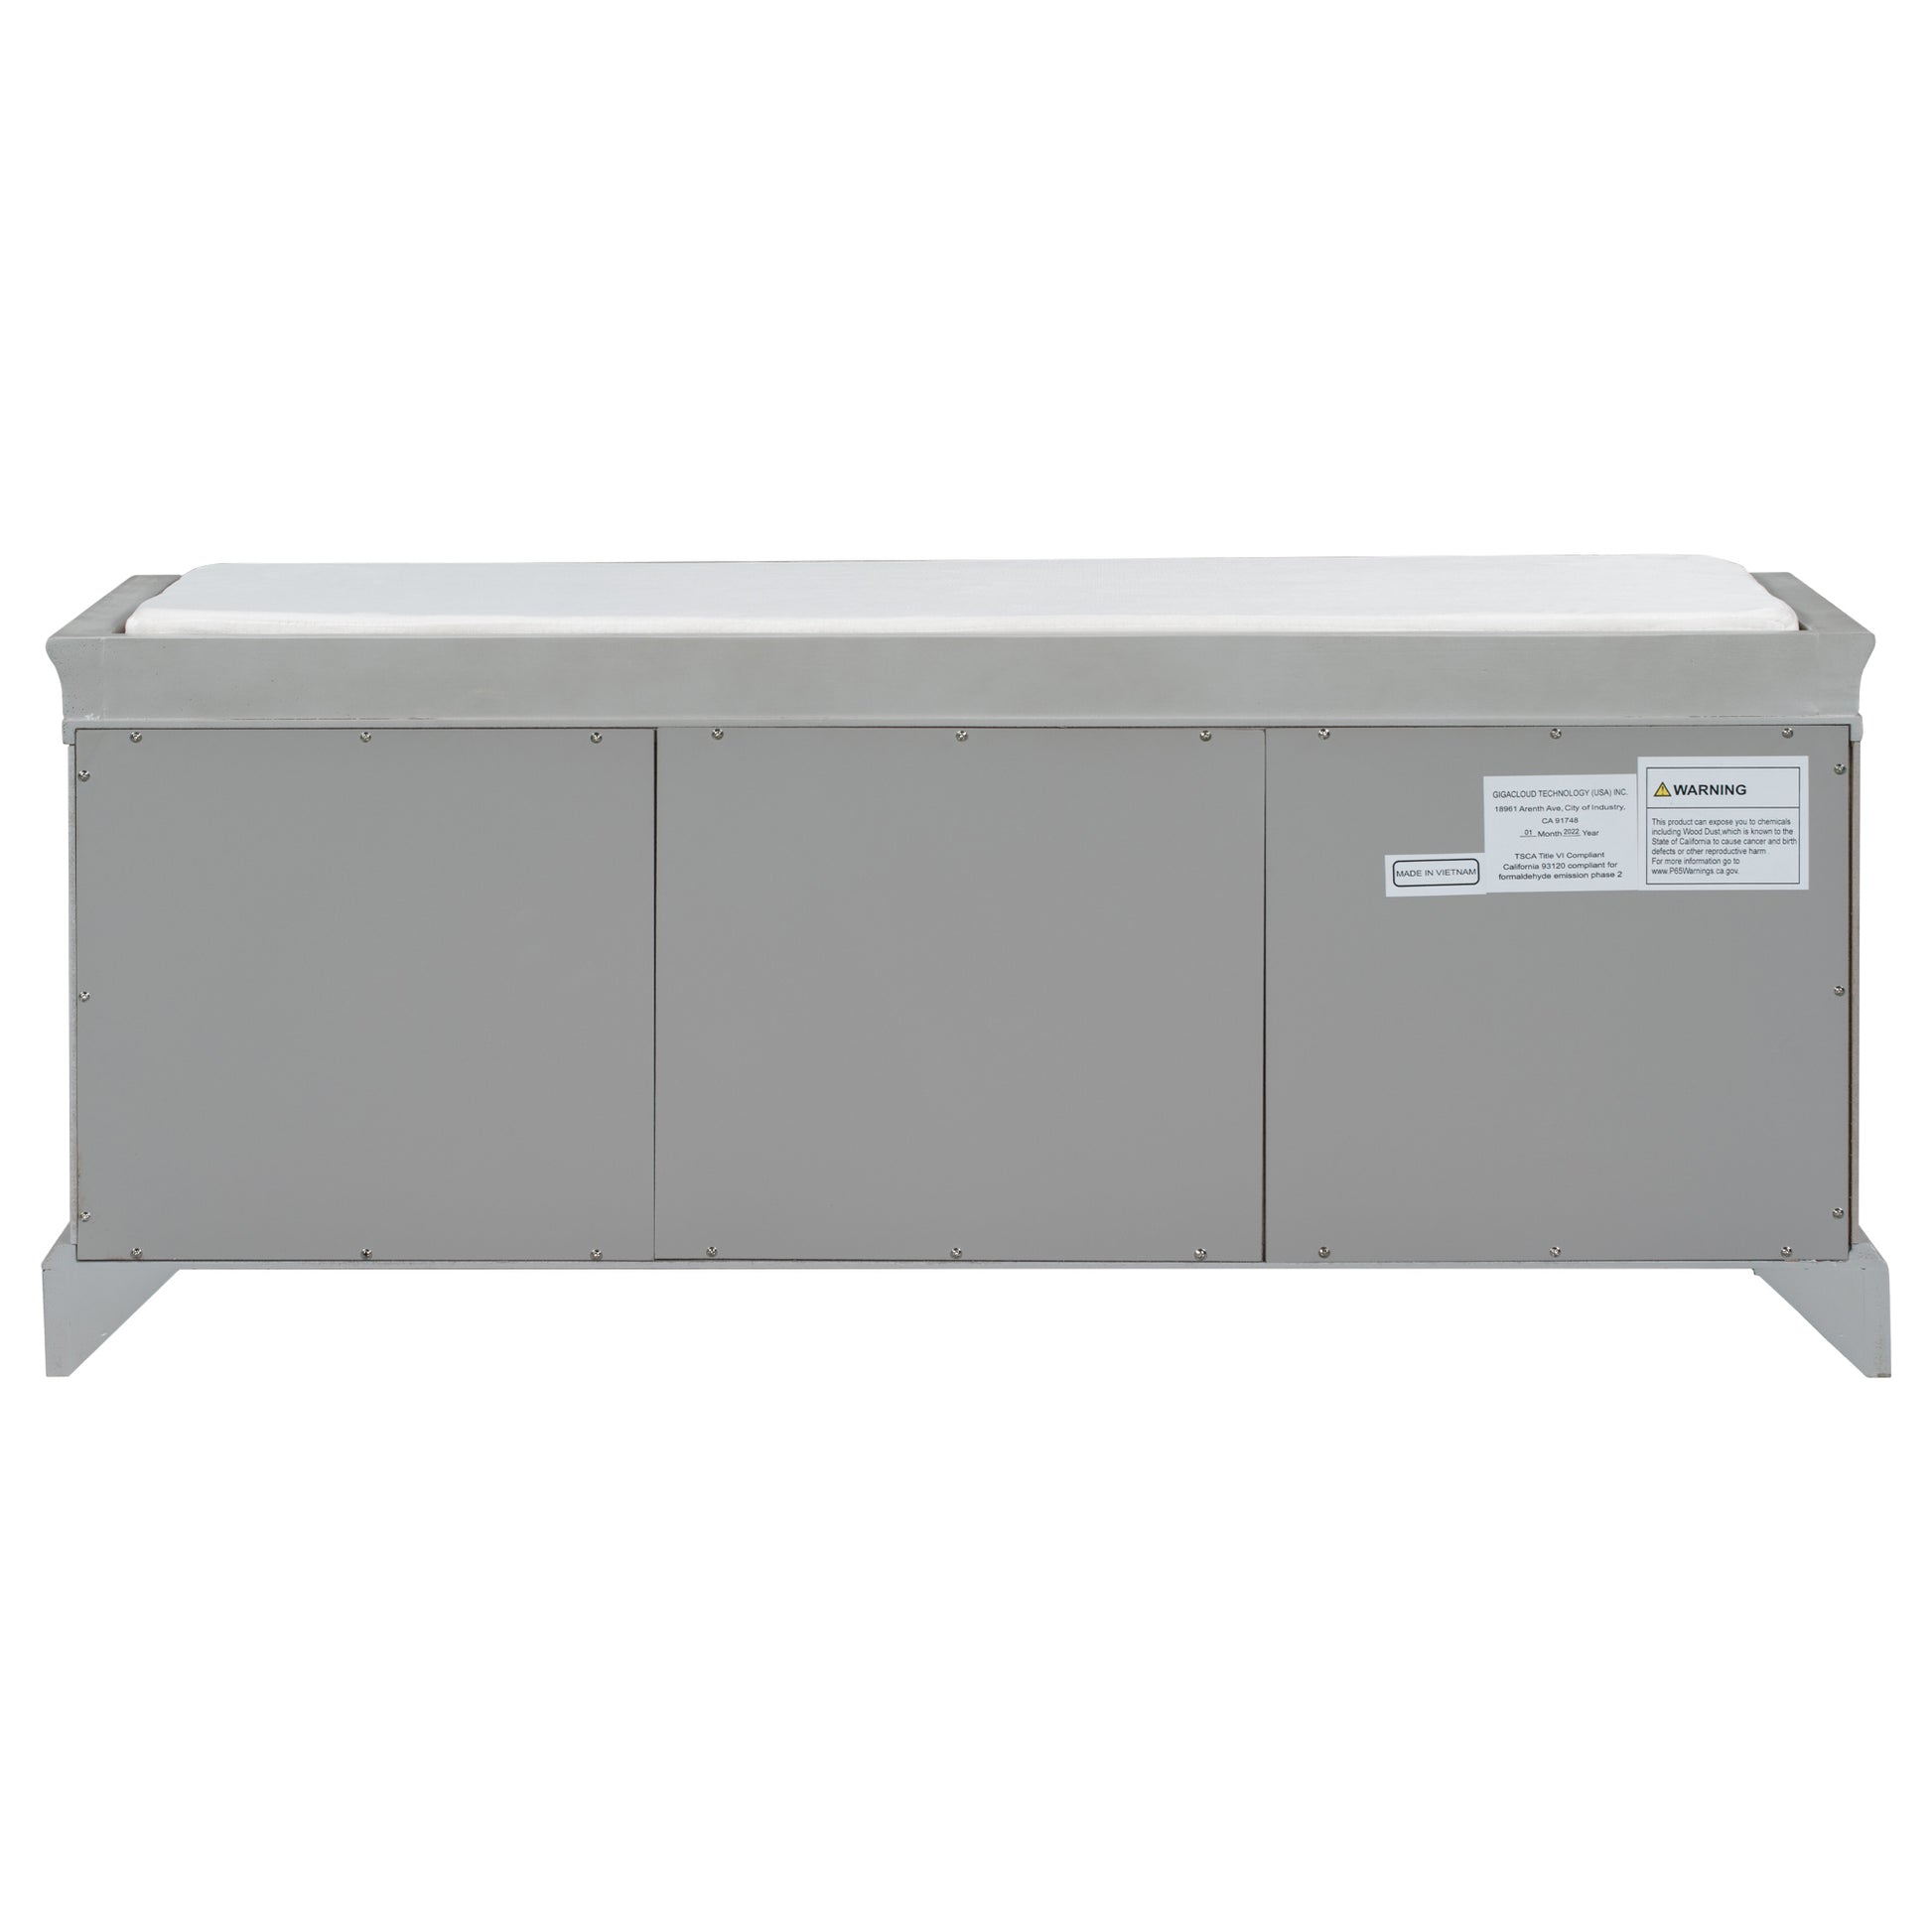 TREXM Storage Bench with 2 Drawers and 2 Cabinets - Gray Wash